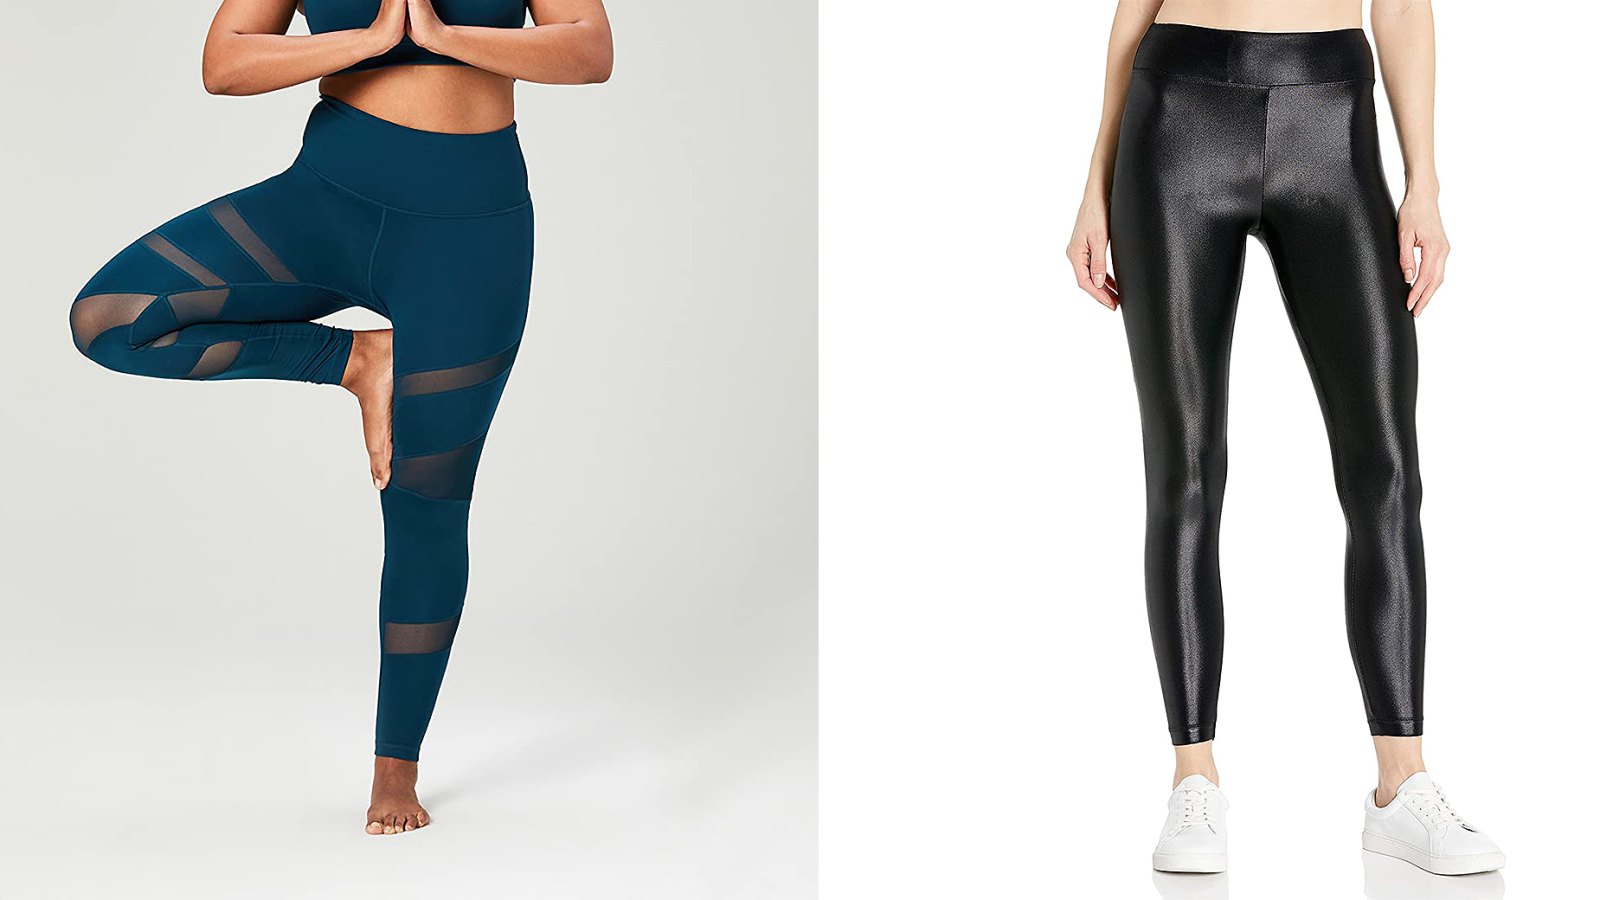 Prime Wardrobe: Try These 5 Pairs of Leggings at Home for Free